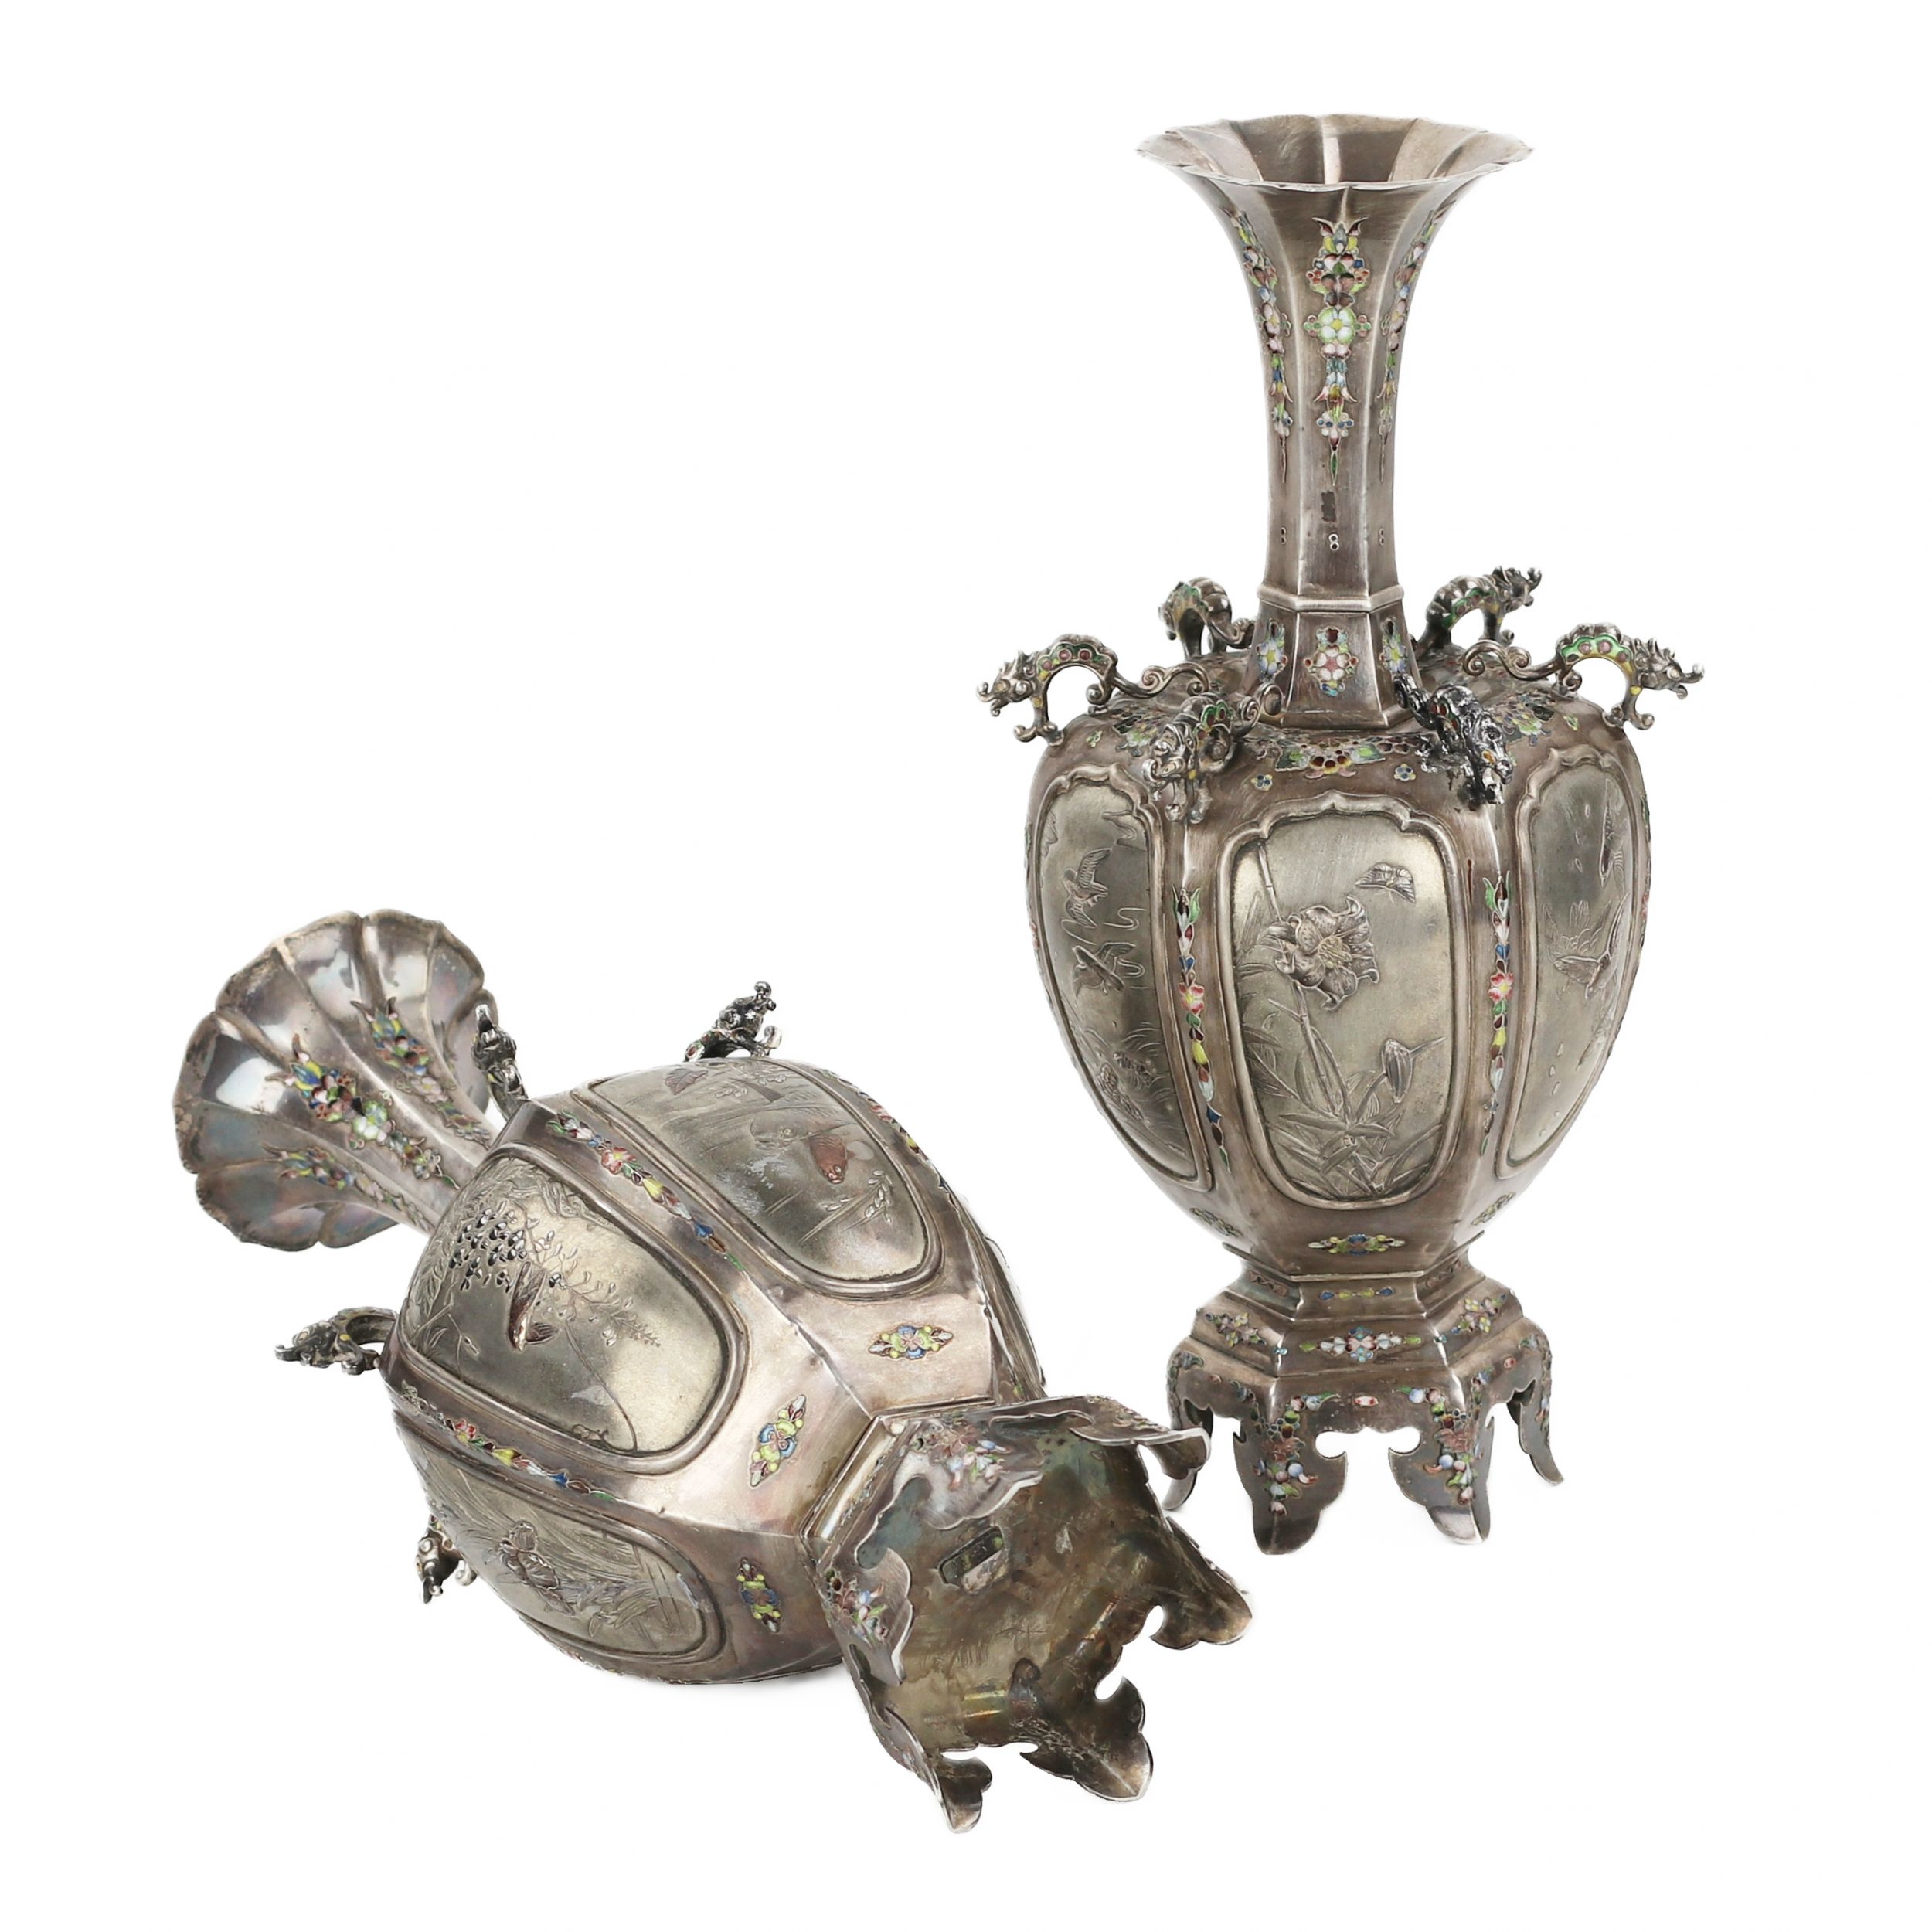 A pair of elegant Japanese vases made of silver and enamel. The turn of the 19th-20th centuries. - Bild 5 aus 6